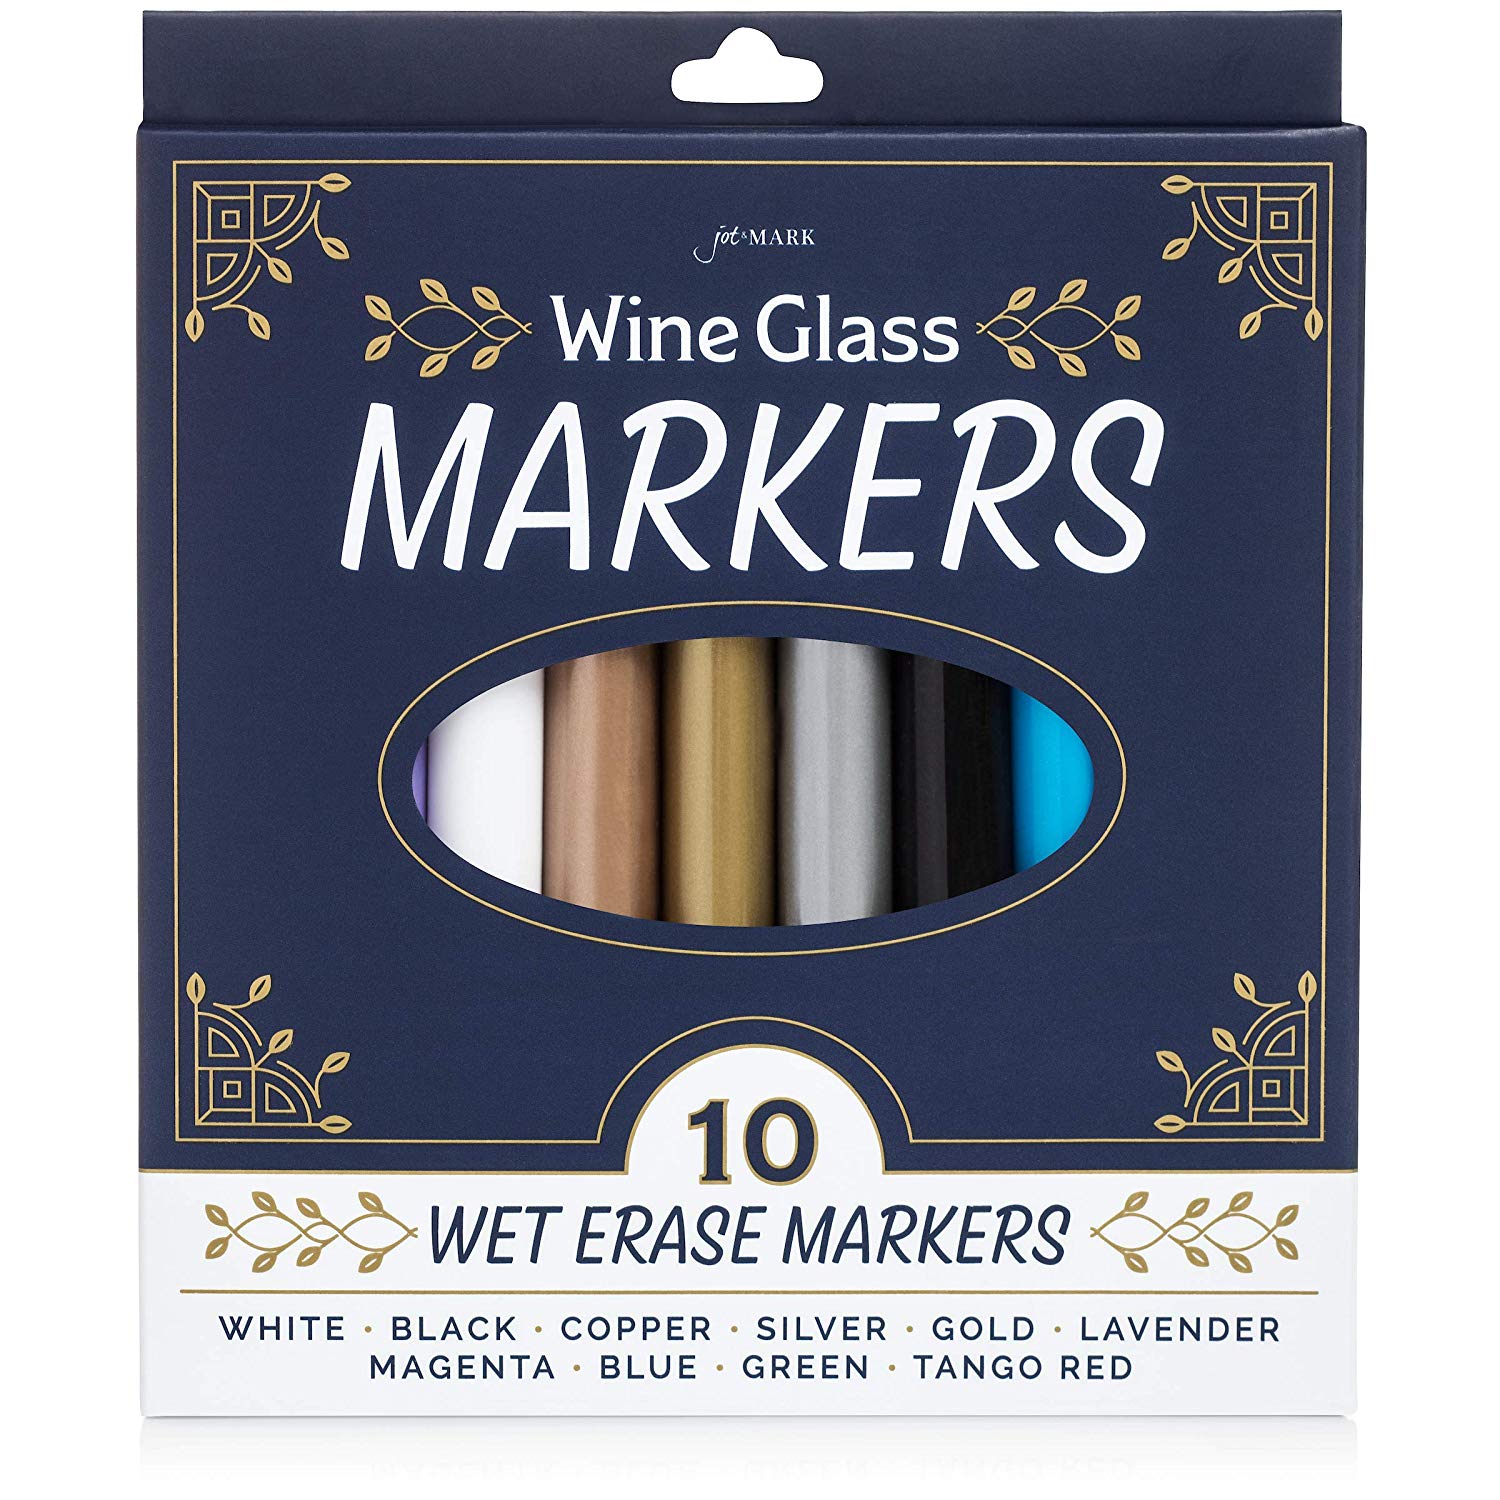 Handy Housewares Erasable Wine Glass Marker Pen Set - Gold & Silver Color - Write on Glass, Great for Weddings, Banquets and Parties!